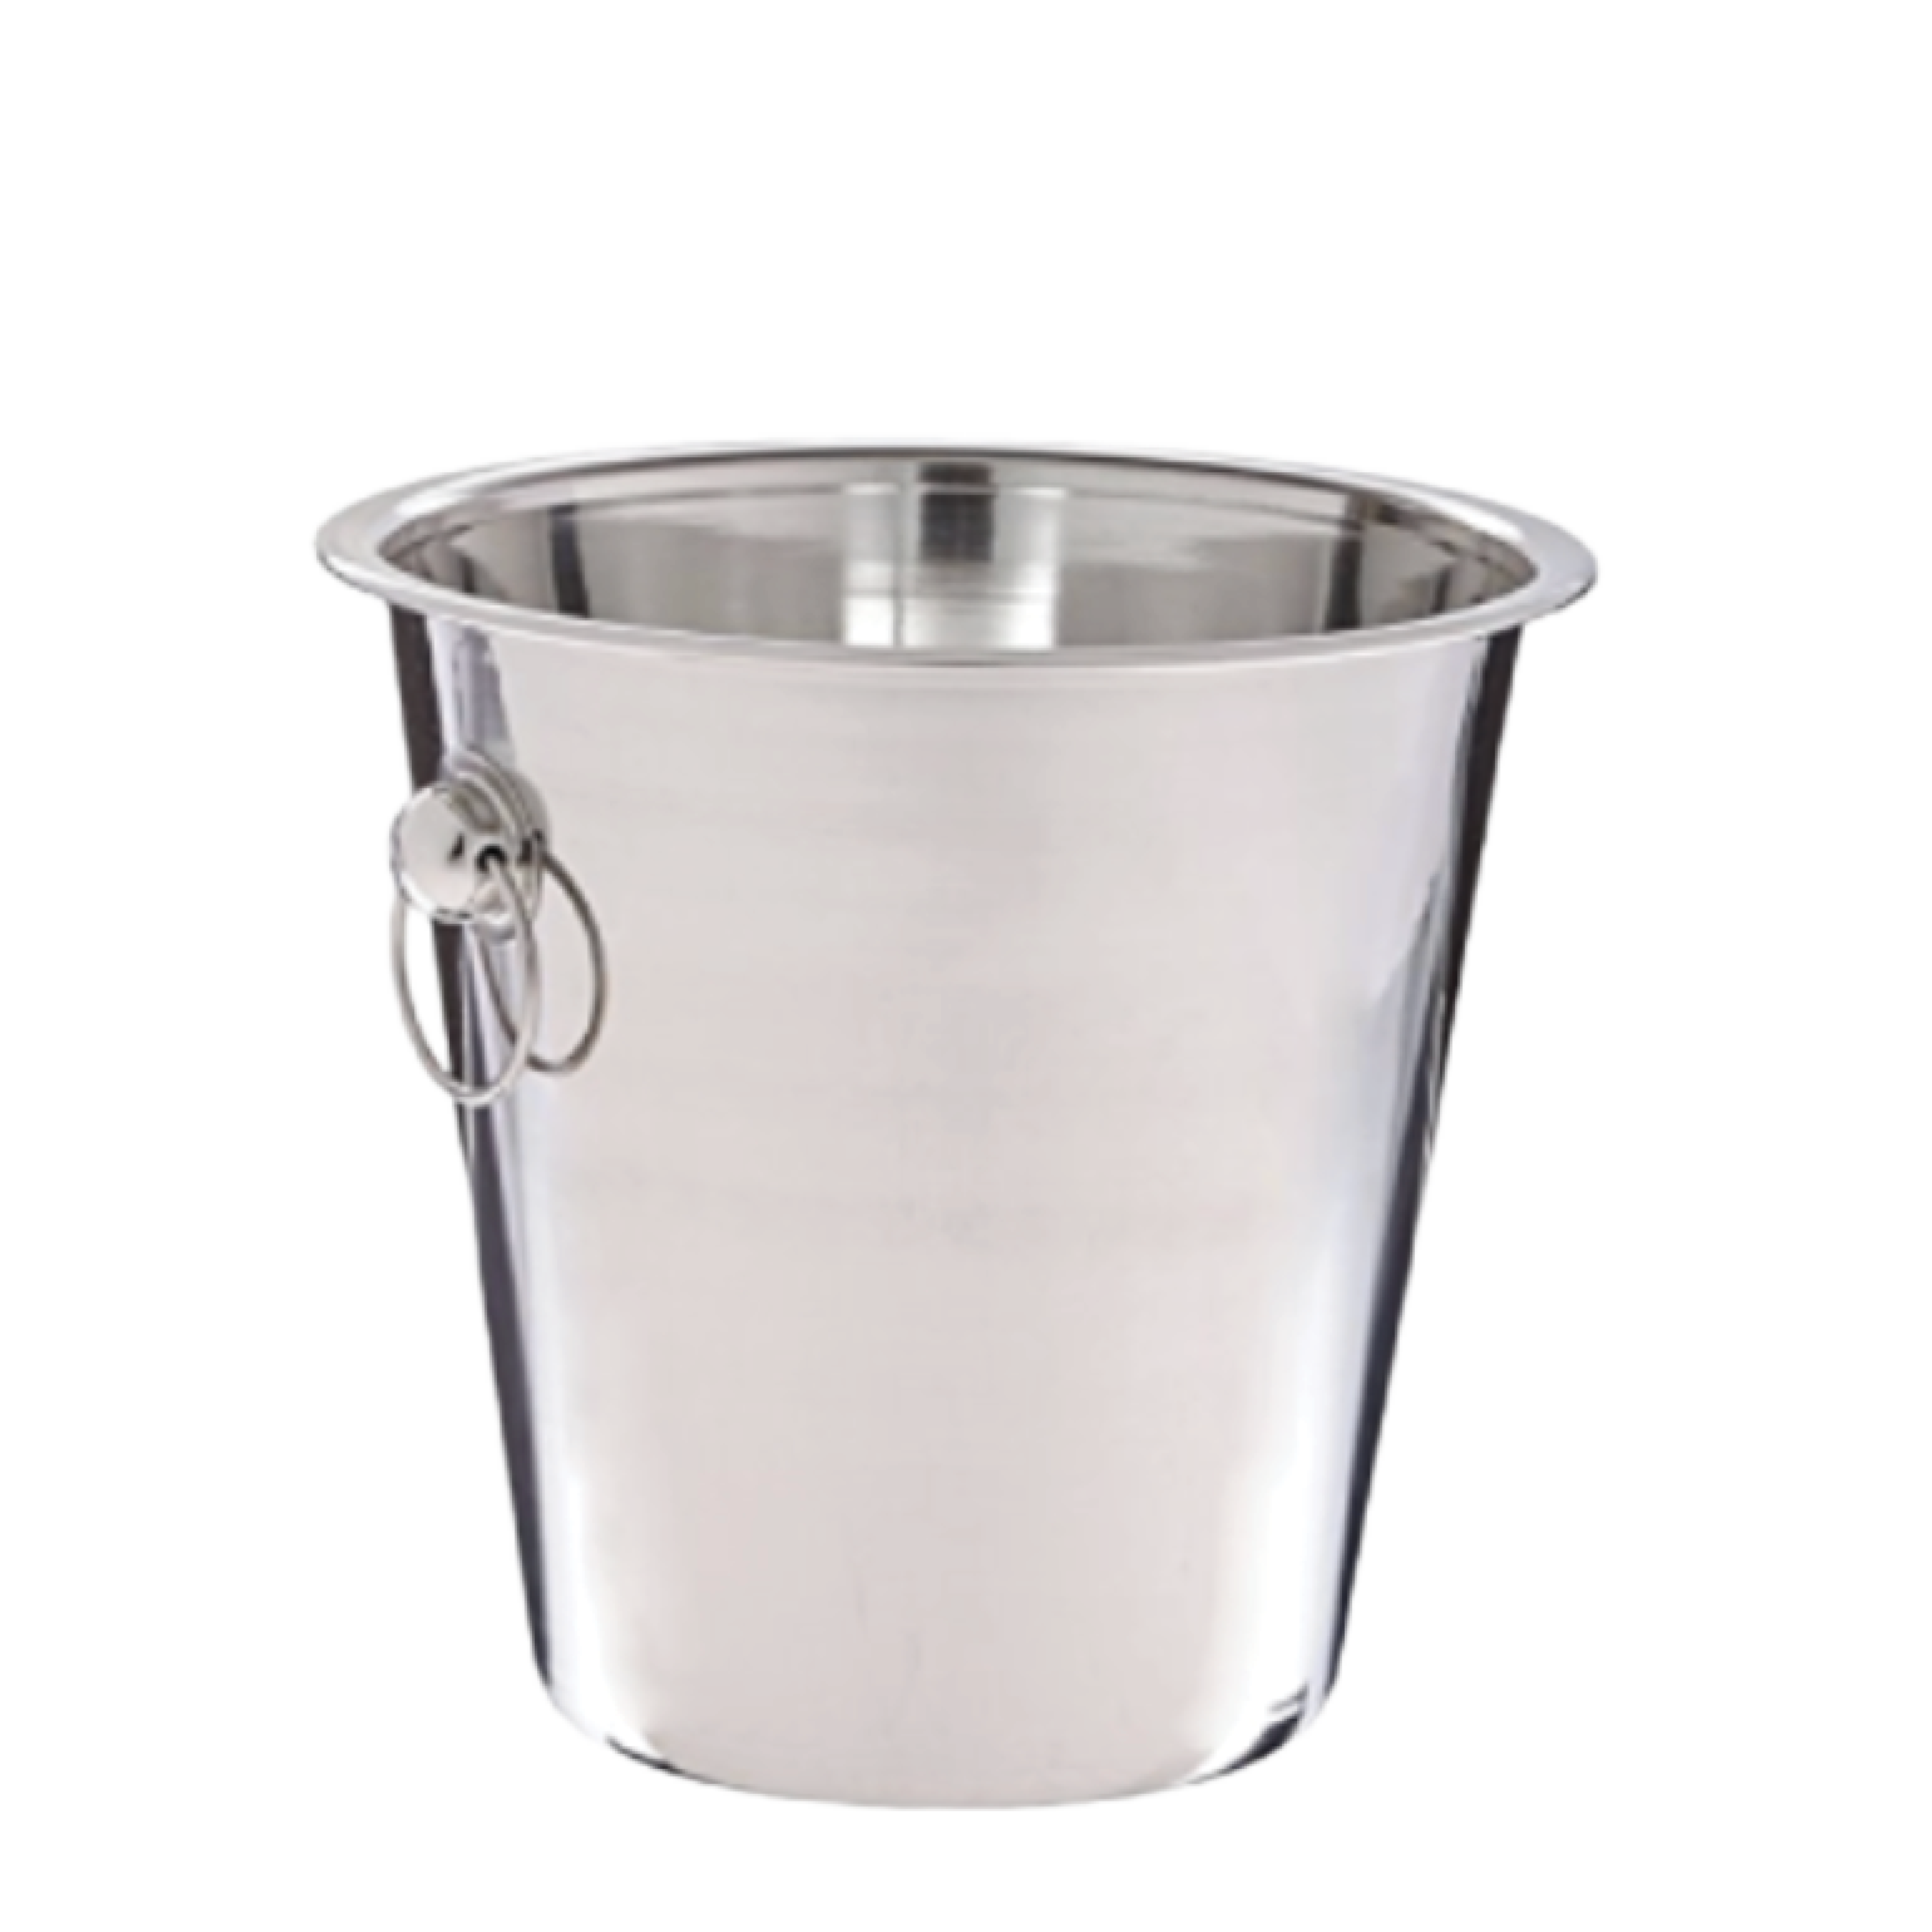 https://pleasebeseated.com/wp-content/uploads/2022/11/classic-silver-wine-bucket-1.png